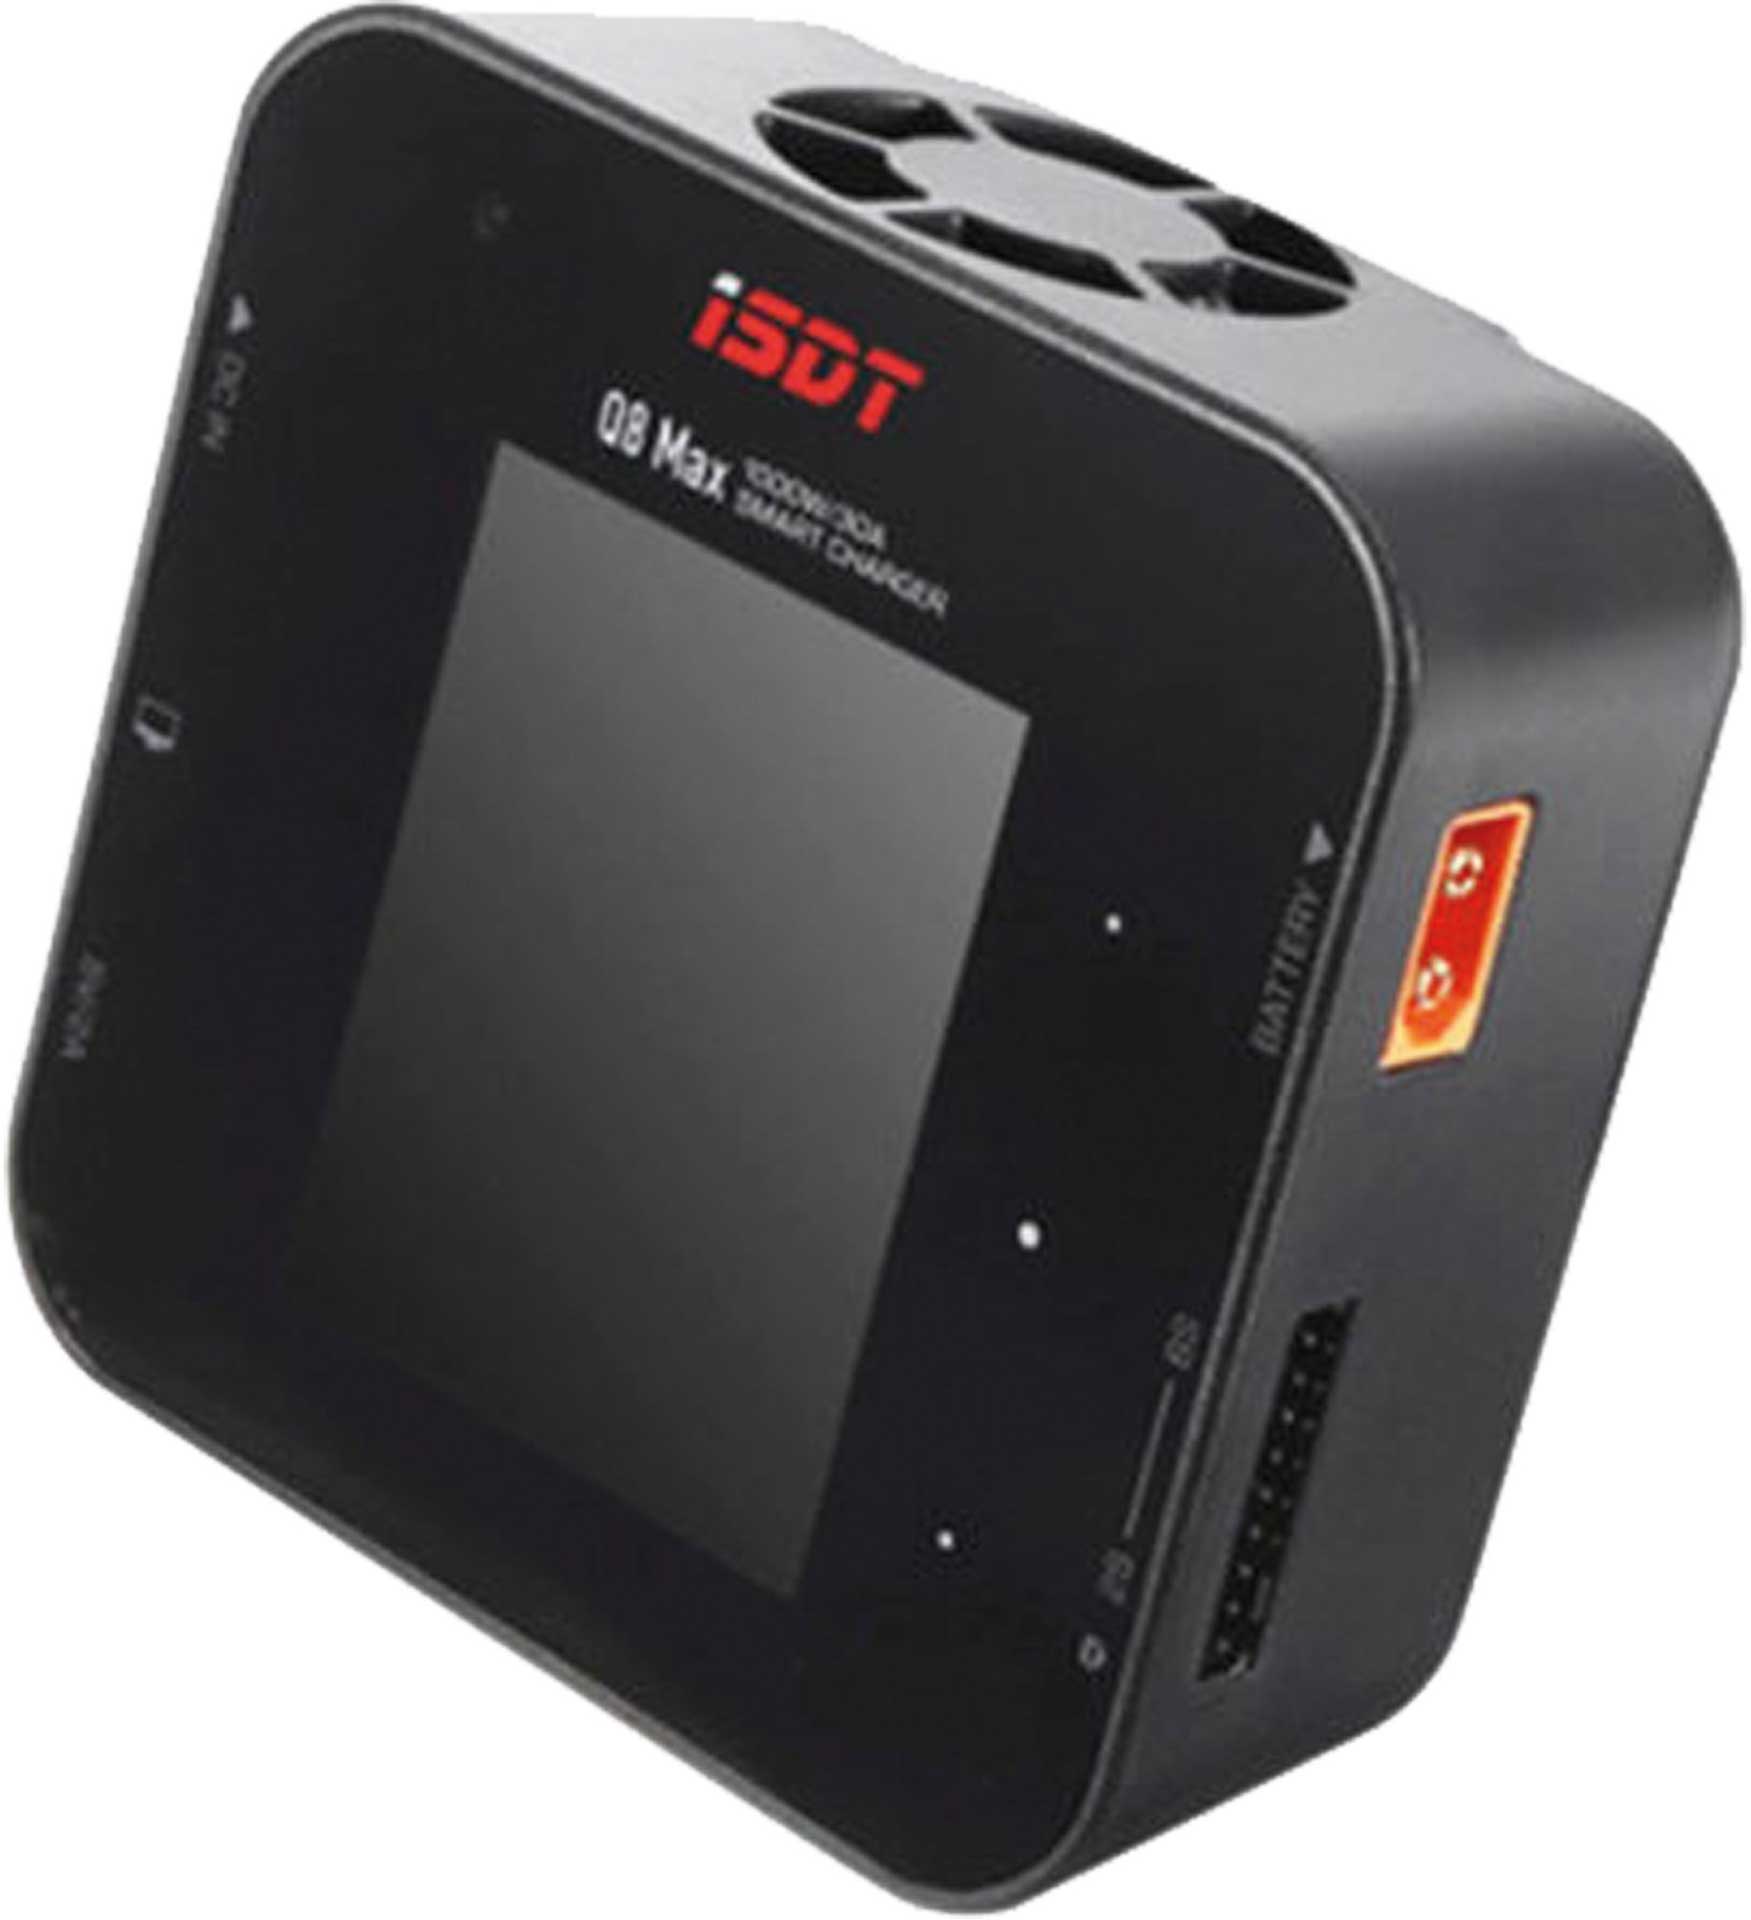 ISDT Q8 MAX SMART CHARGER 1000W 1-7(8)S -30A